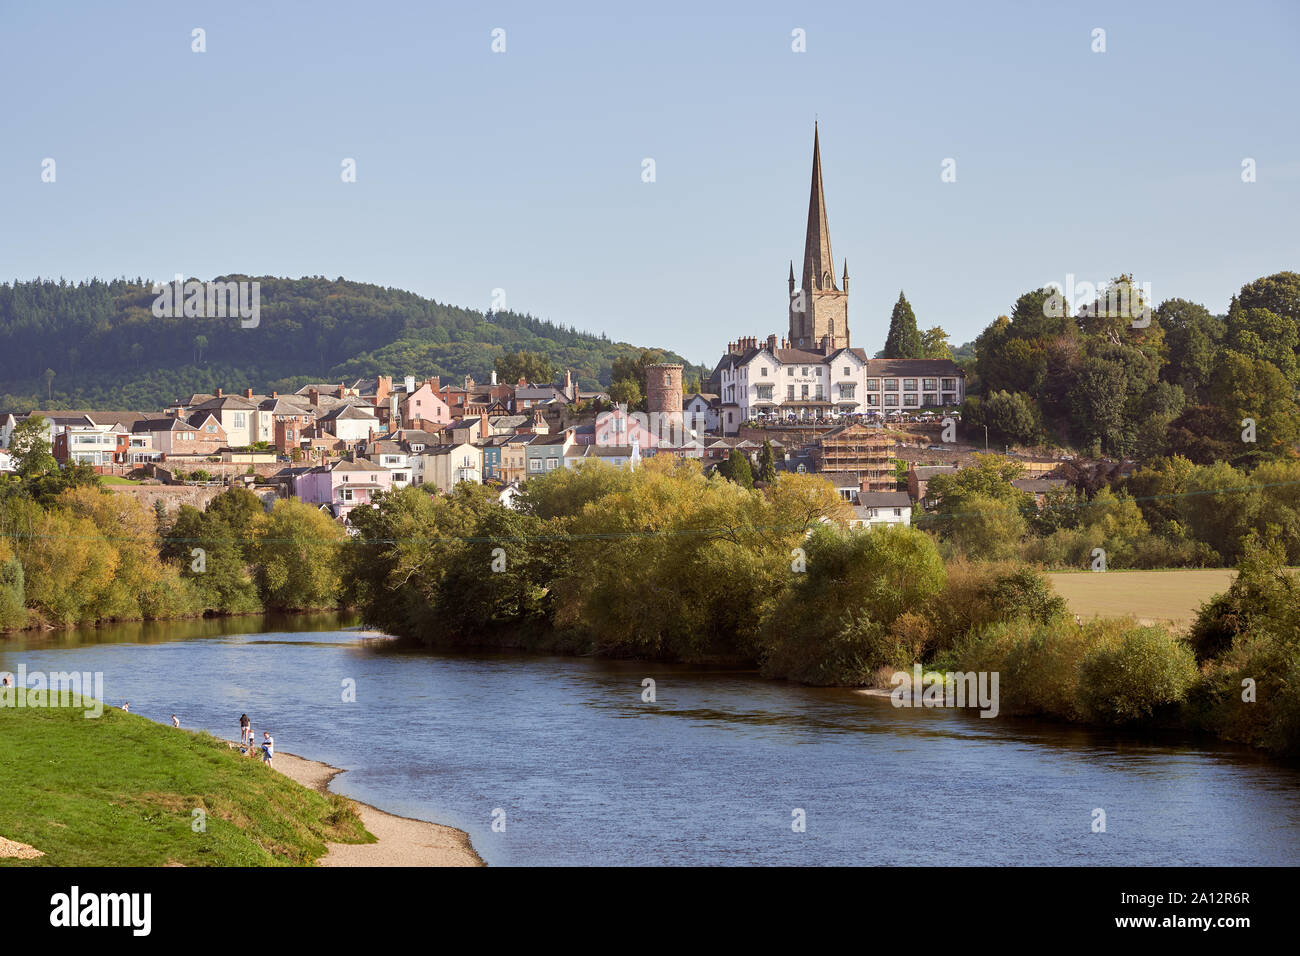 Ross-on-Wye in Herefordshire, UK Stock Photo